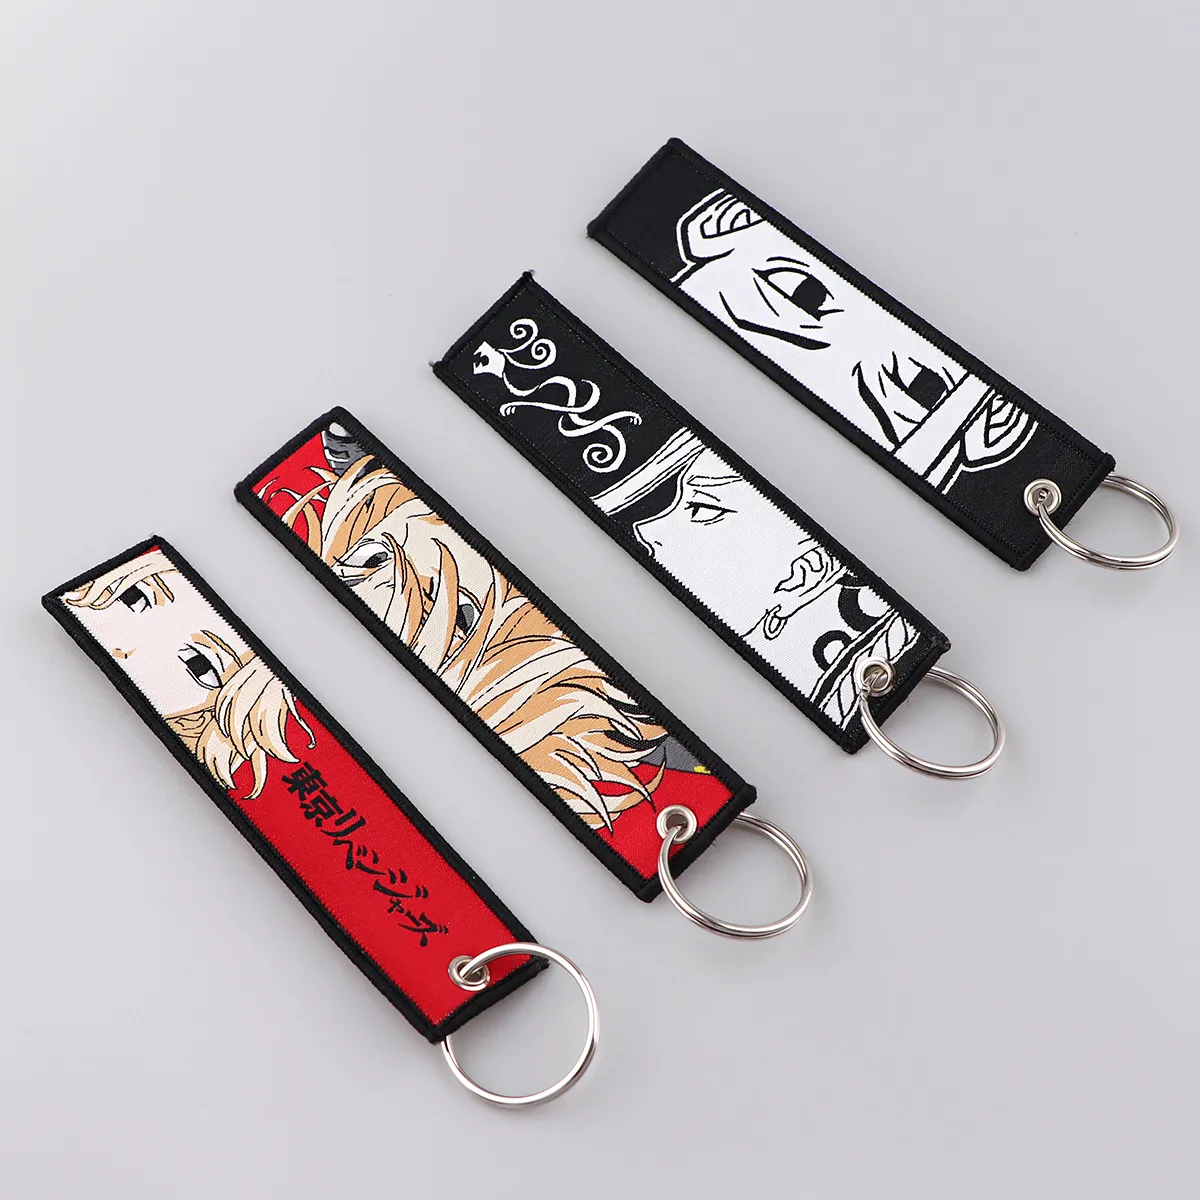 Japanese Anime Key Tag Key Ring Motorcycles Cars Bag Backpack Chaveiro  Embroidery Key Fobs Fashion Keychain